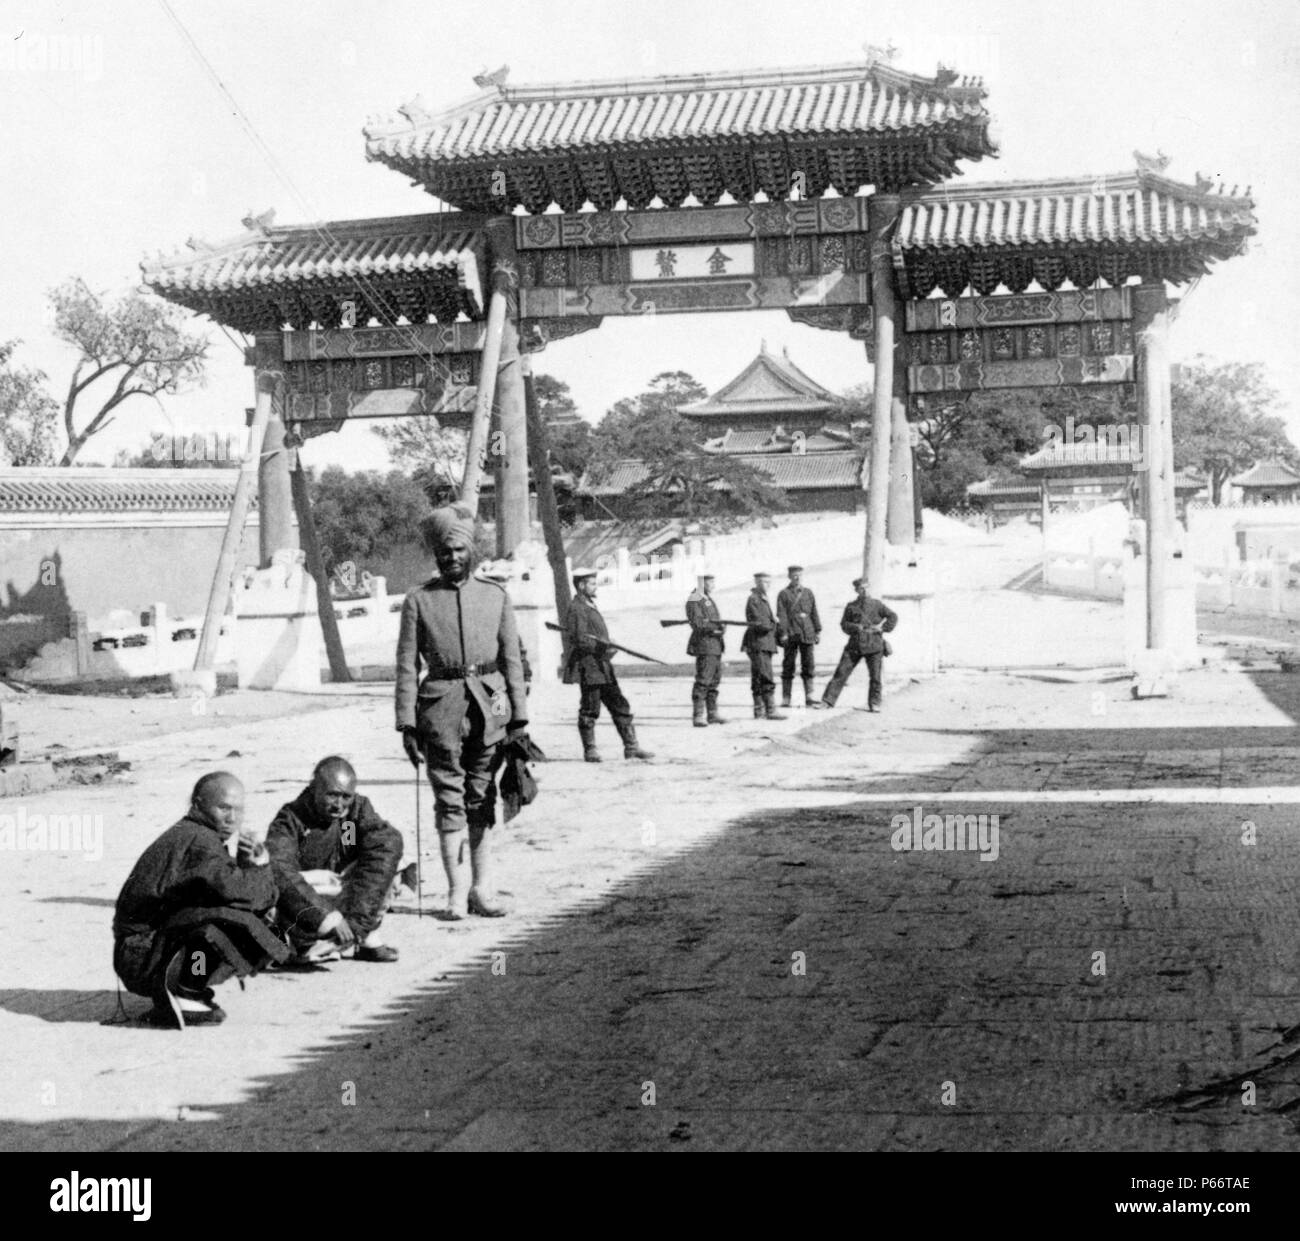 east over Marble Bridge toward the Forbidden City, Peking, 1901. photographic print on stereo card, Indian soldiers and two Chinese men in front of a gate. Stock Photo